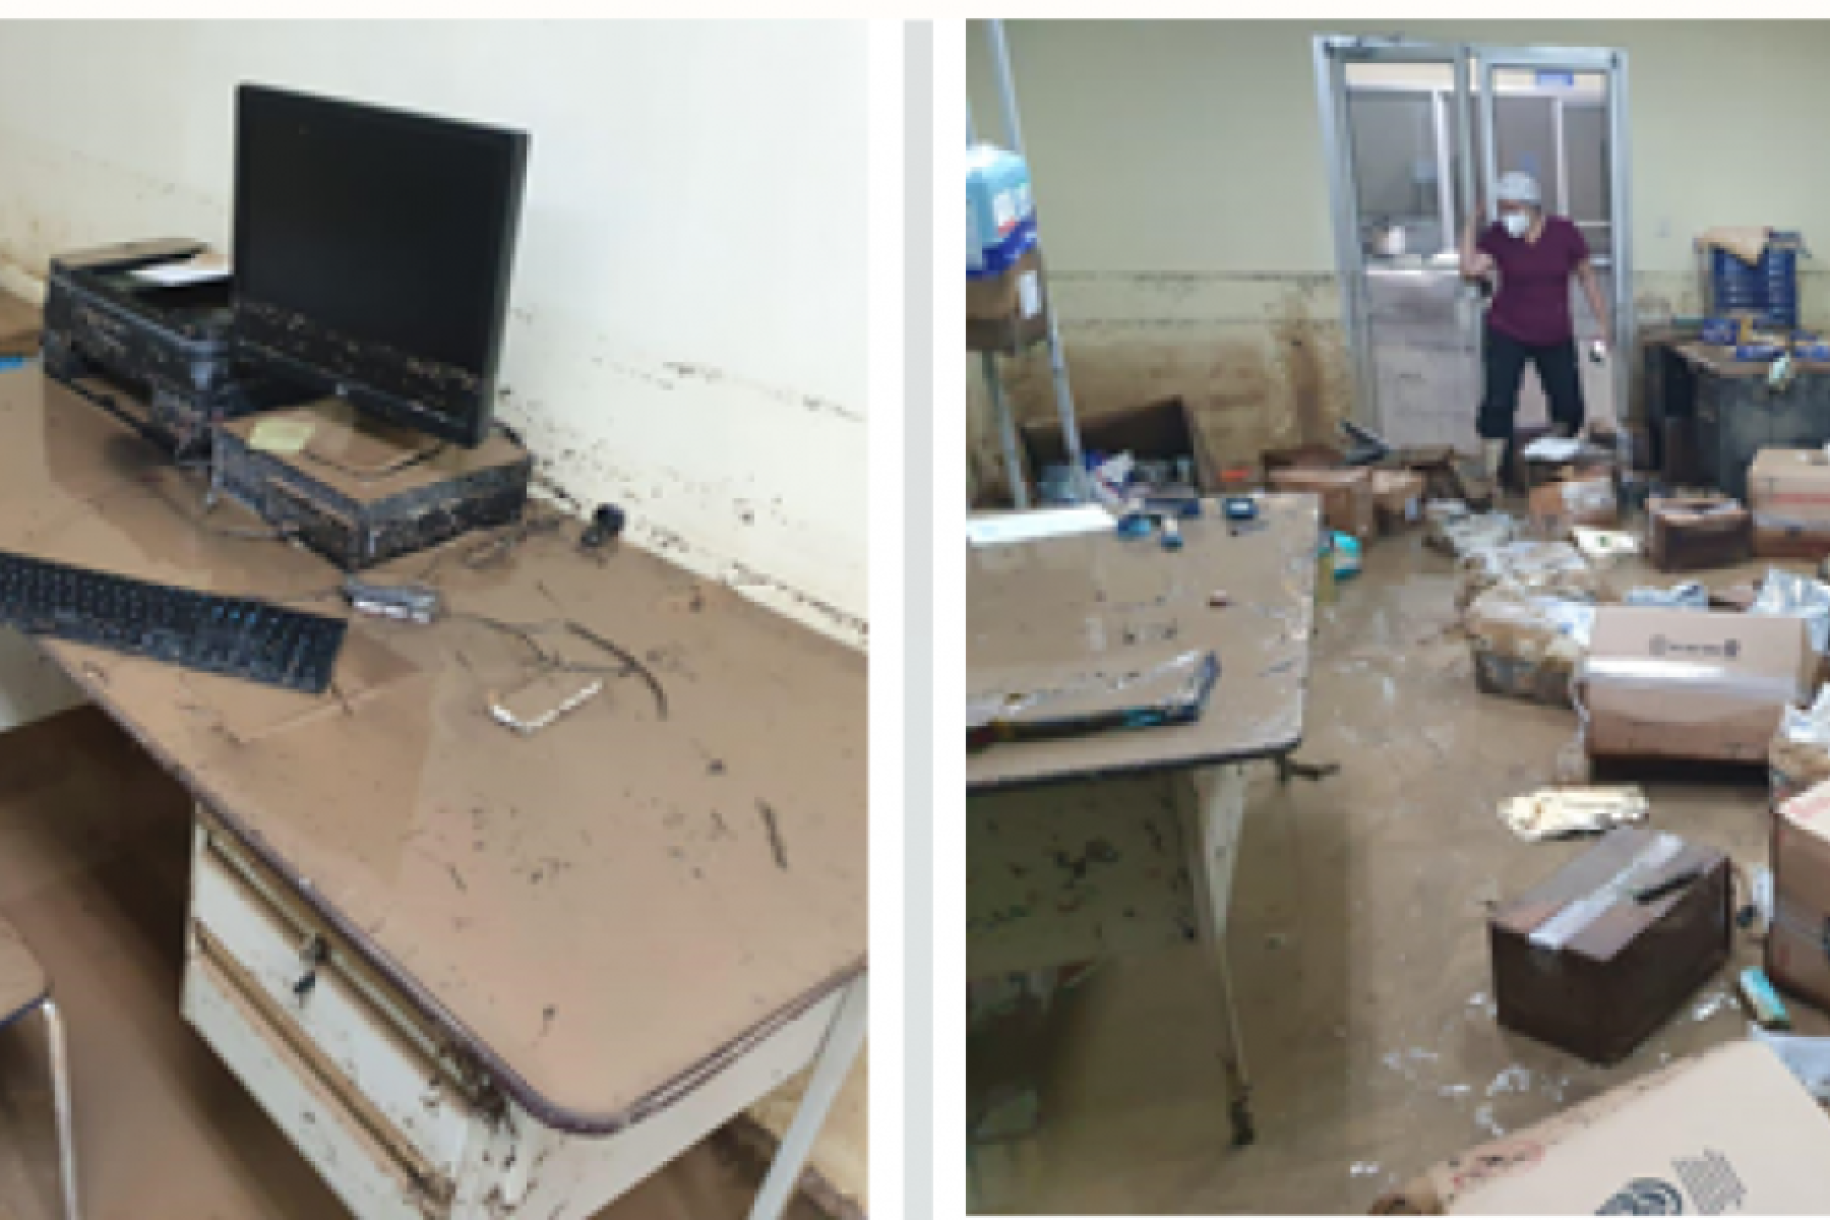 Side-by-side view of a devastated and flooded office space showing damaged equipment and furniture.